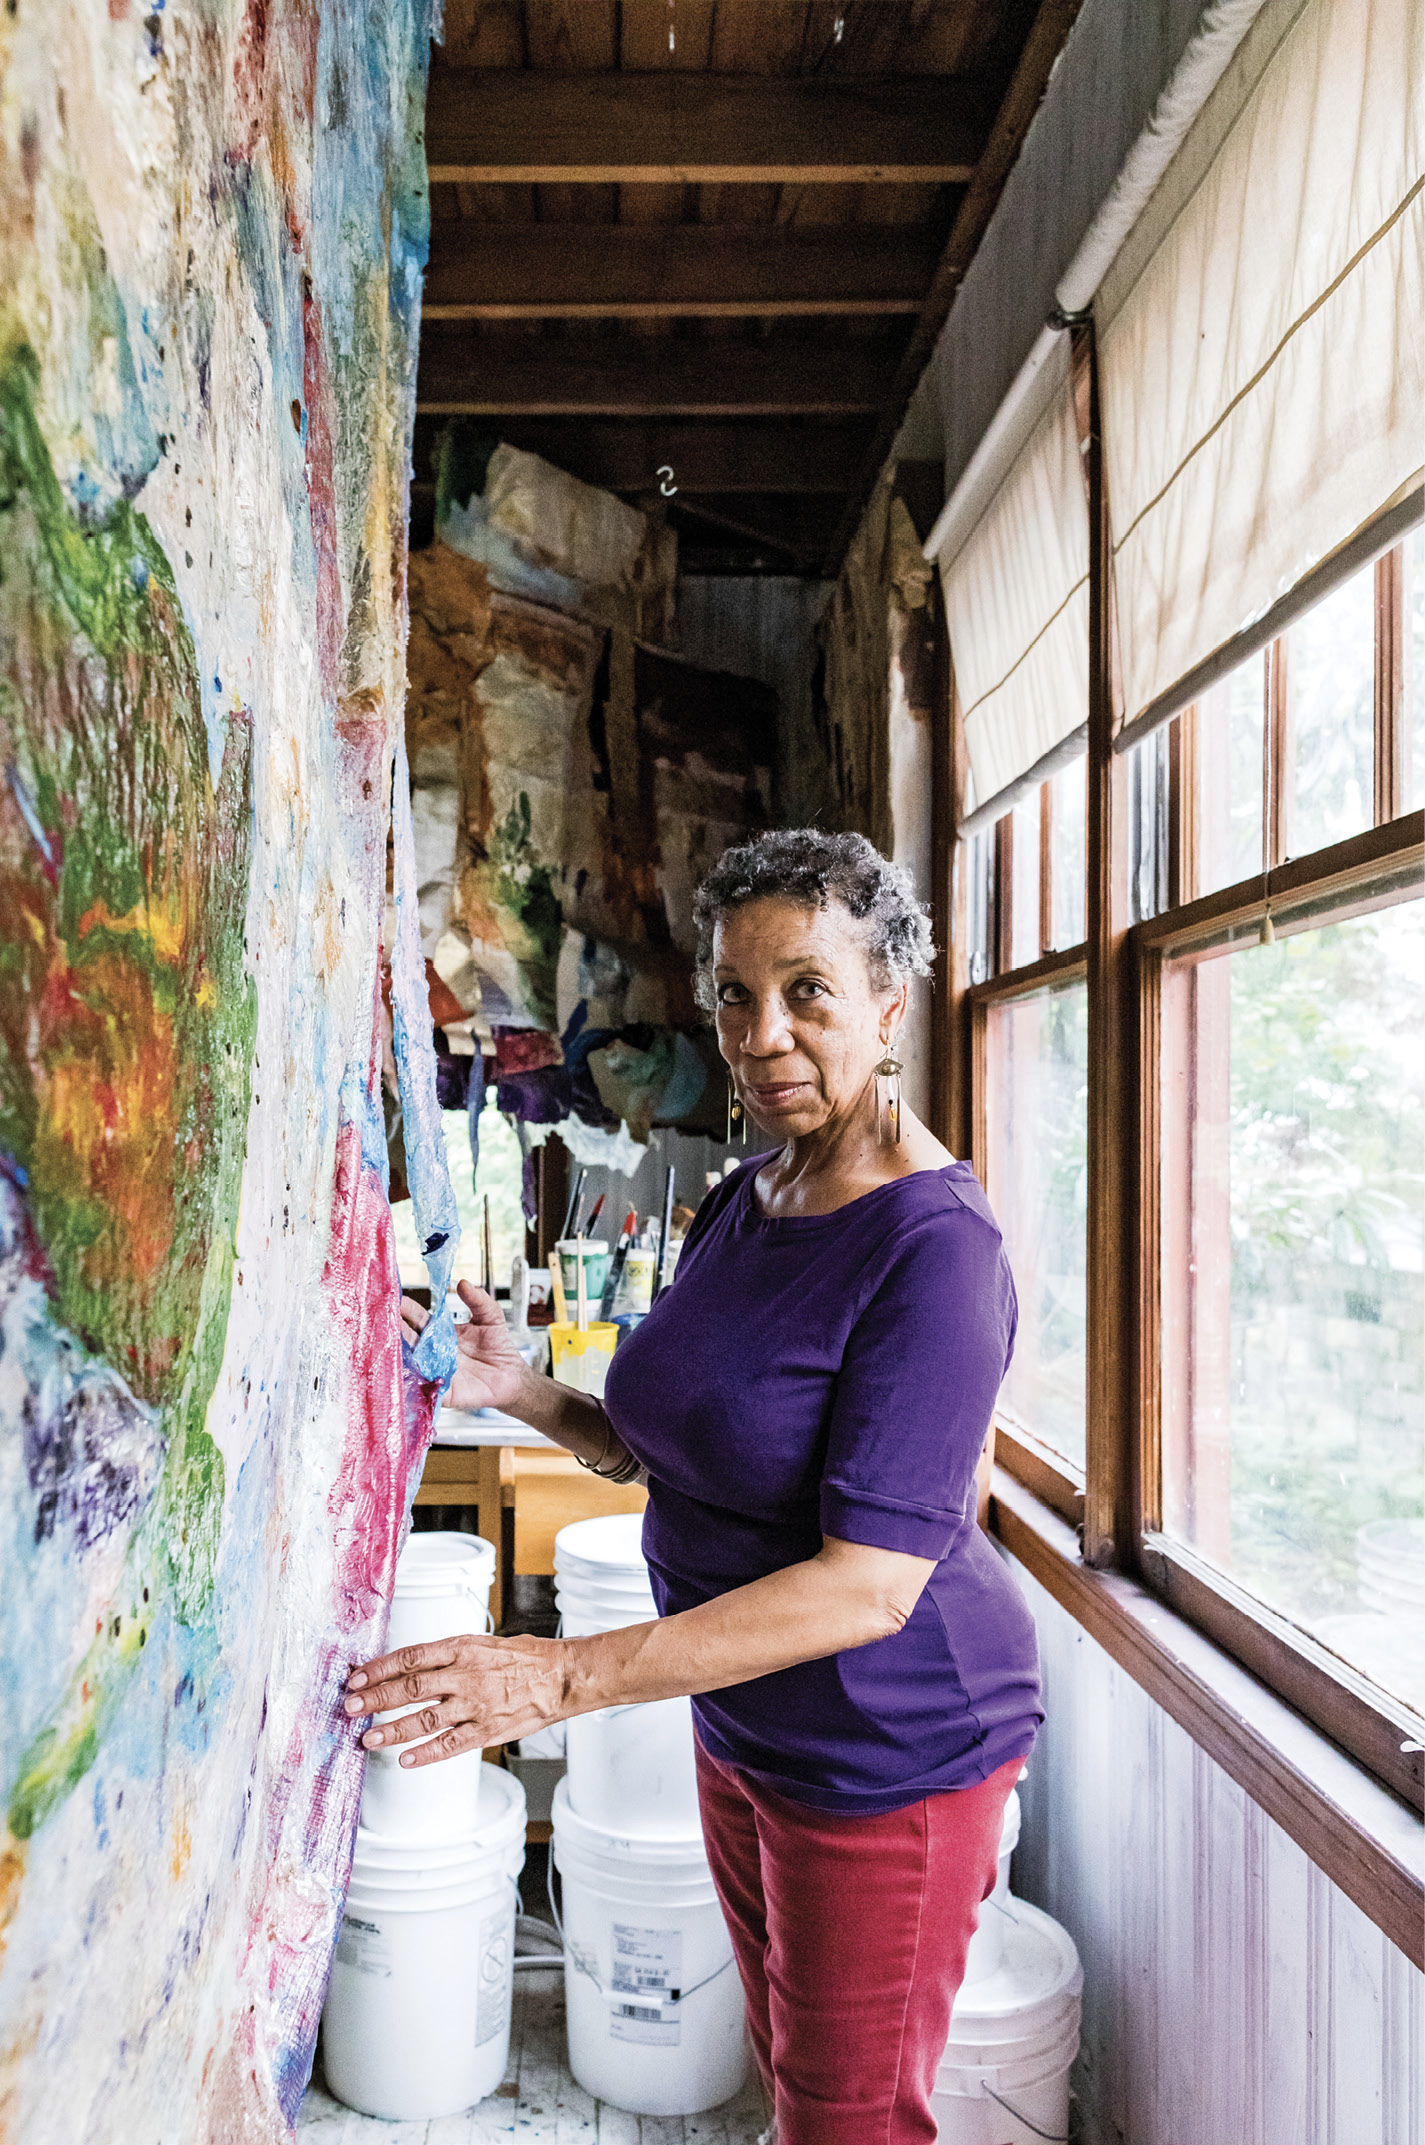 Artist Suzanne Jackson in her home studio in the Starland District; a retrospective of her work titled “Five Decades” was featured last year at the Telfair Museum’s Jepson Center. Her recent paintings are sculptural layers of acrylic—no canvas, no frame.